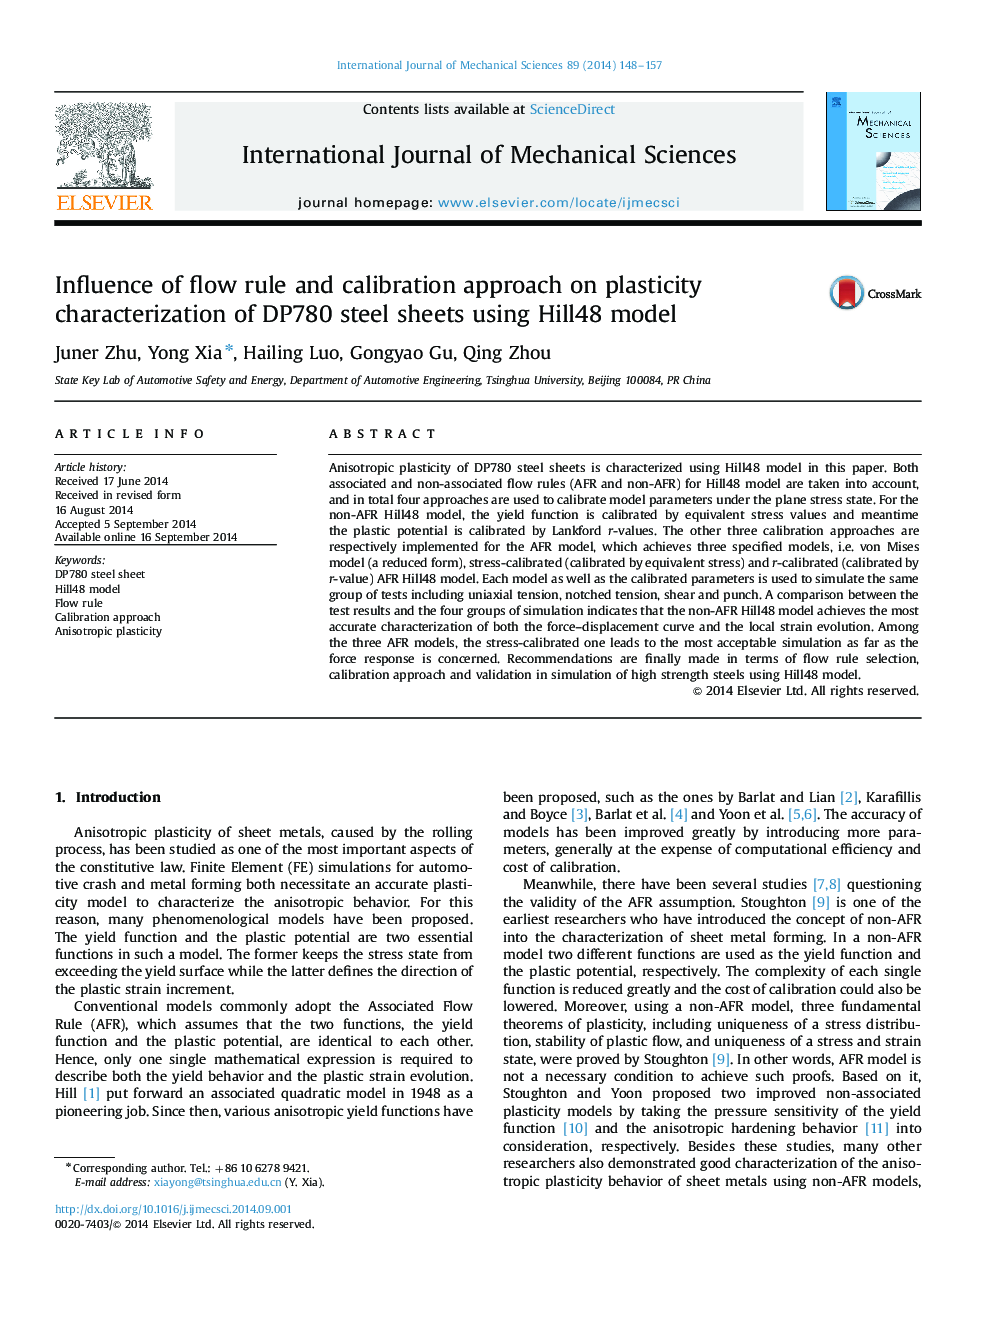 Influence of flow rule and calibration approach on plasticity characterization of DP780 steel sheets using Hill48 model